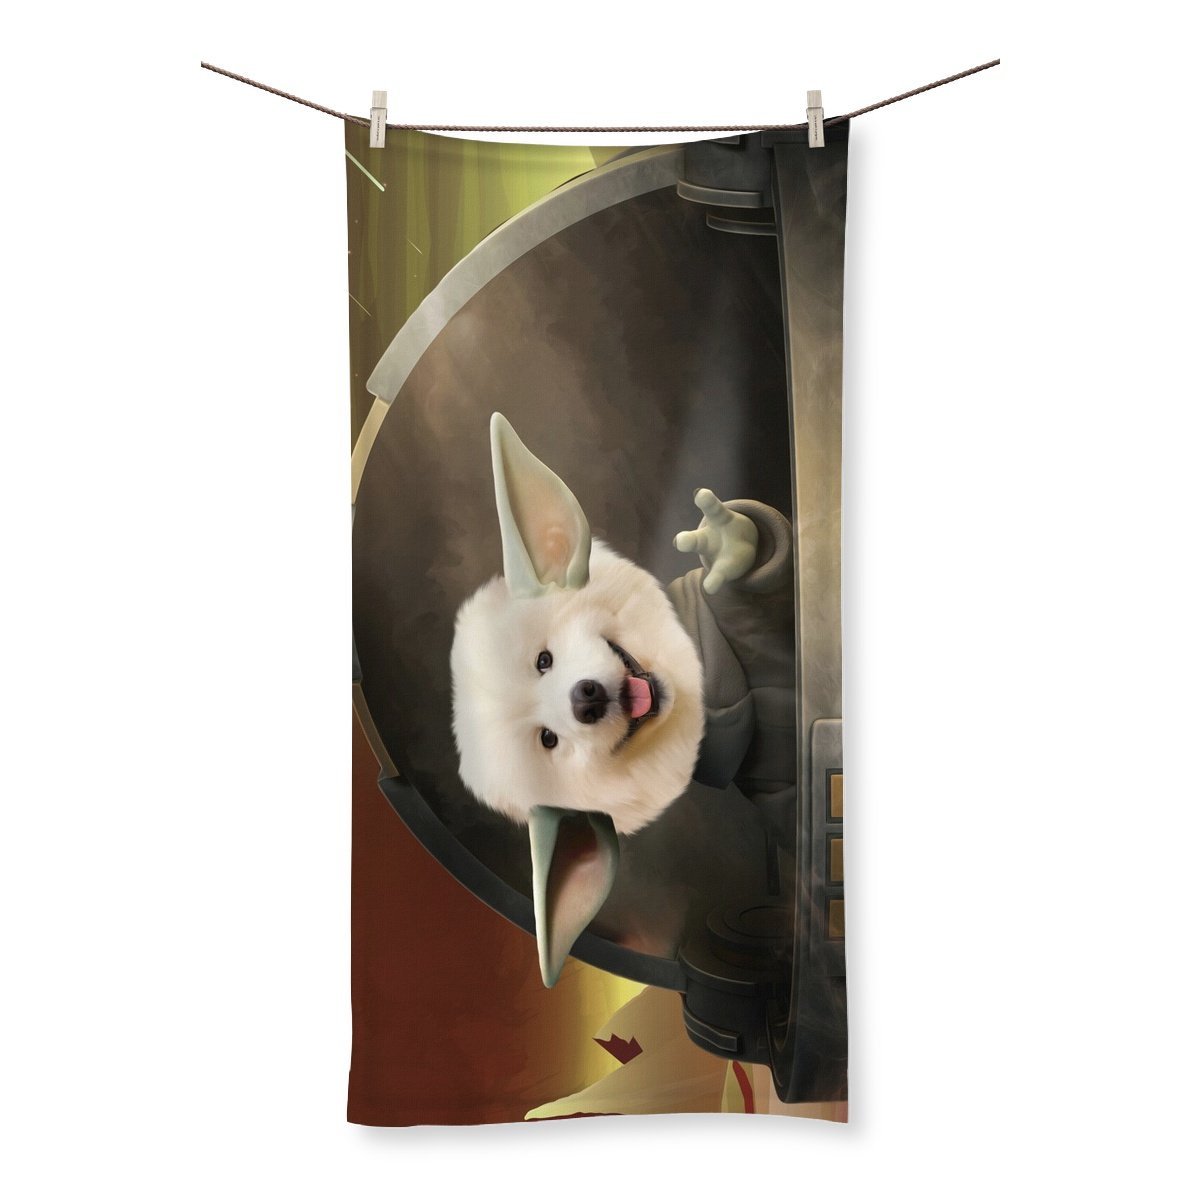 Baby Yoda: Custom Pet Towel - Paw & Glory - #pet portraits# - #dog portraits# - #pet portraits uk#Paw & Glory, pawandglory, personalized pet and owner canvas, in home pet photography, dog astronaut photo, nasa dog portrait, pet portrait singapore, best dog artists, pet portraitscustom pet portrait Towel,